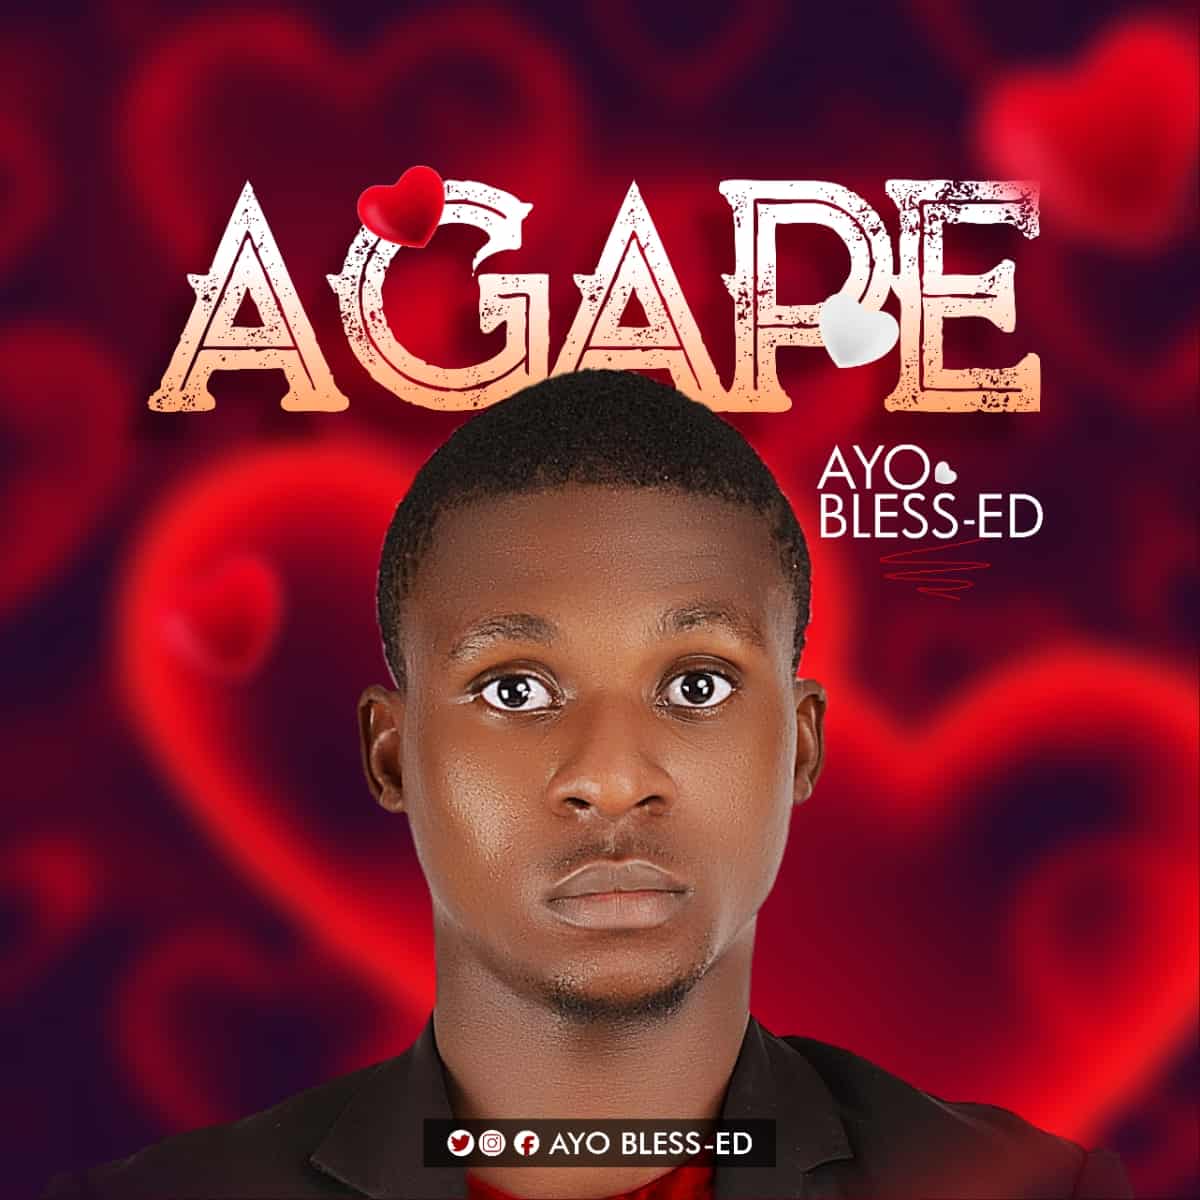 Download Mp3: Ayo Bless-ed - Agape